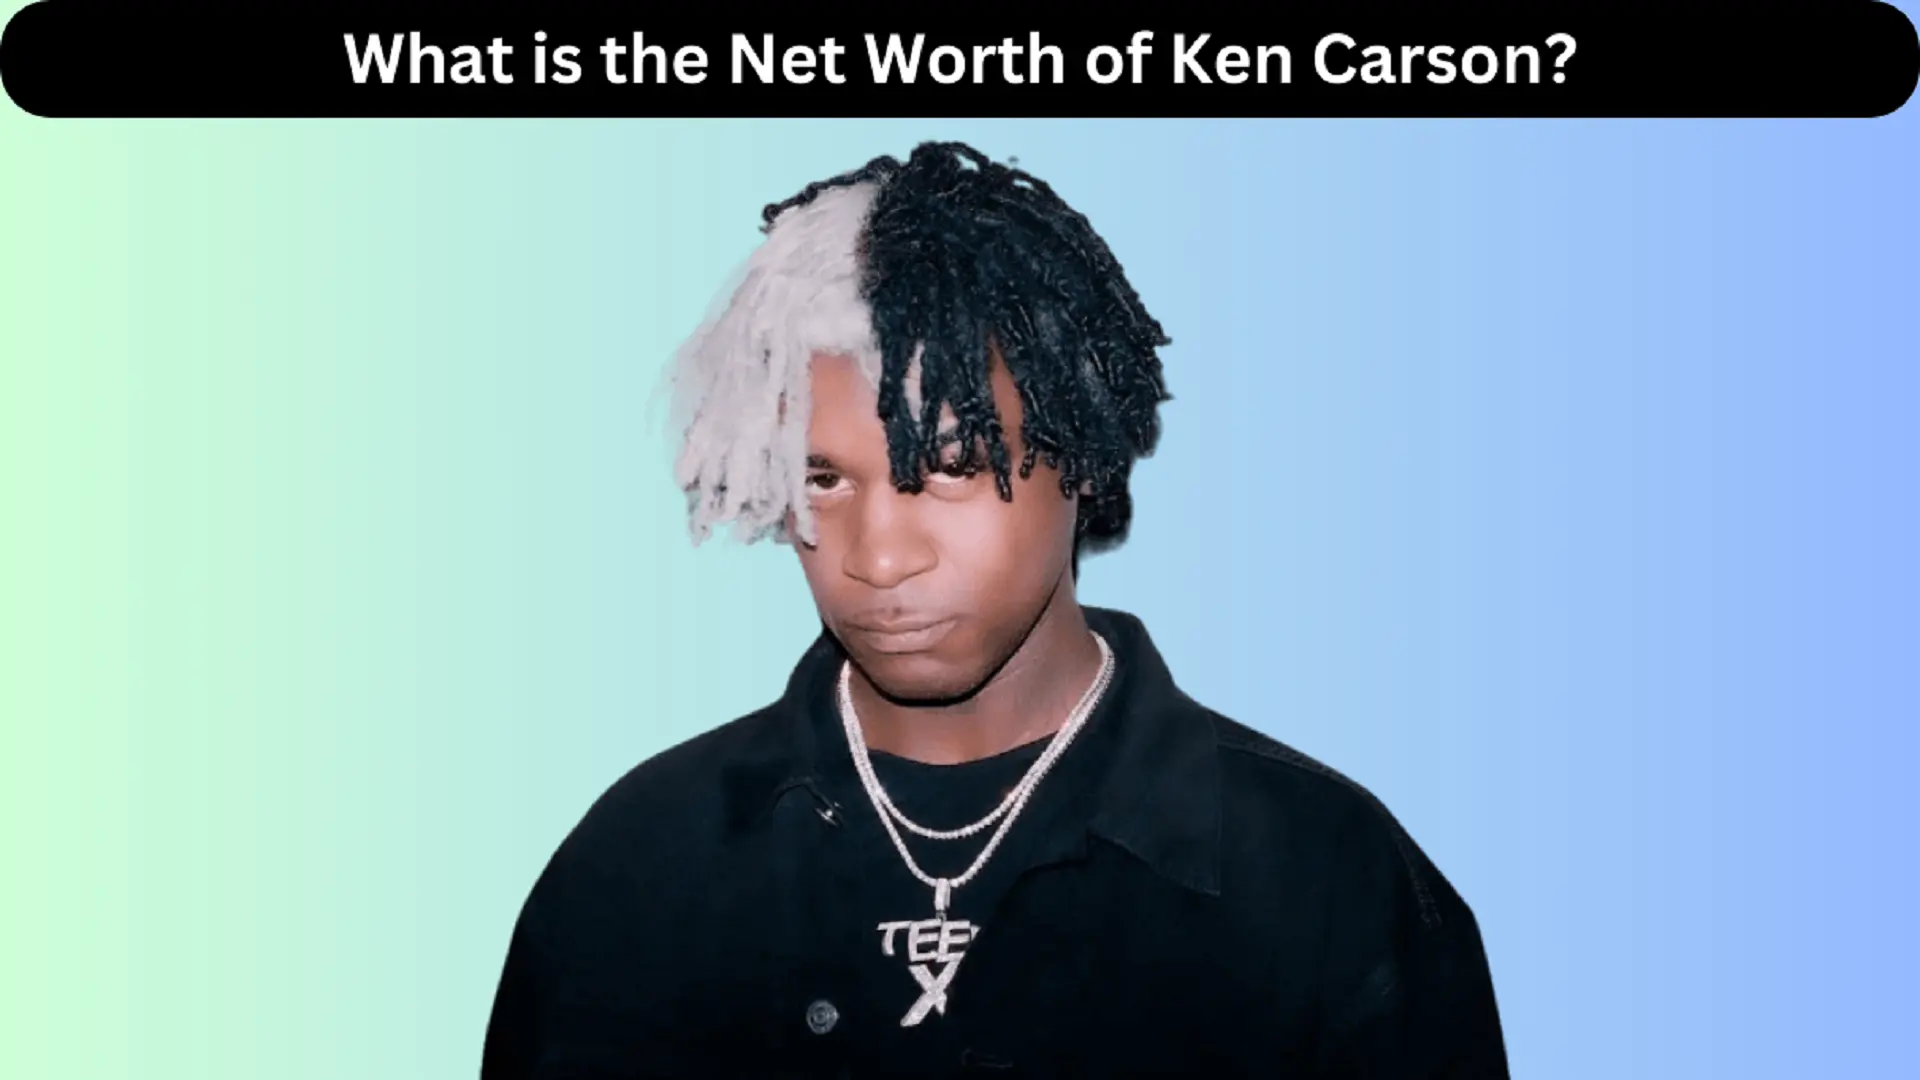 What is the Net Worth of Ken Carson